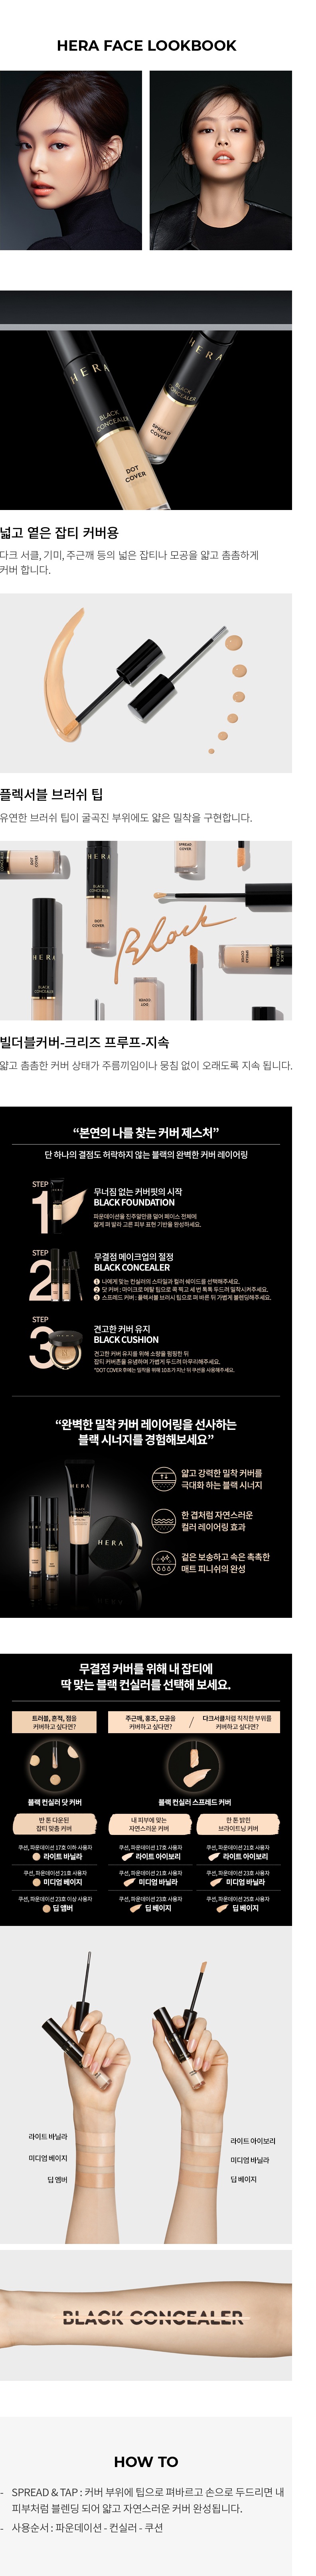 Hera Black Concealer Spread Cover korean cosmetic product online shop malaysia China india1